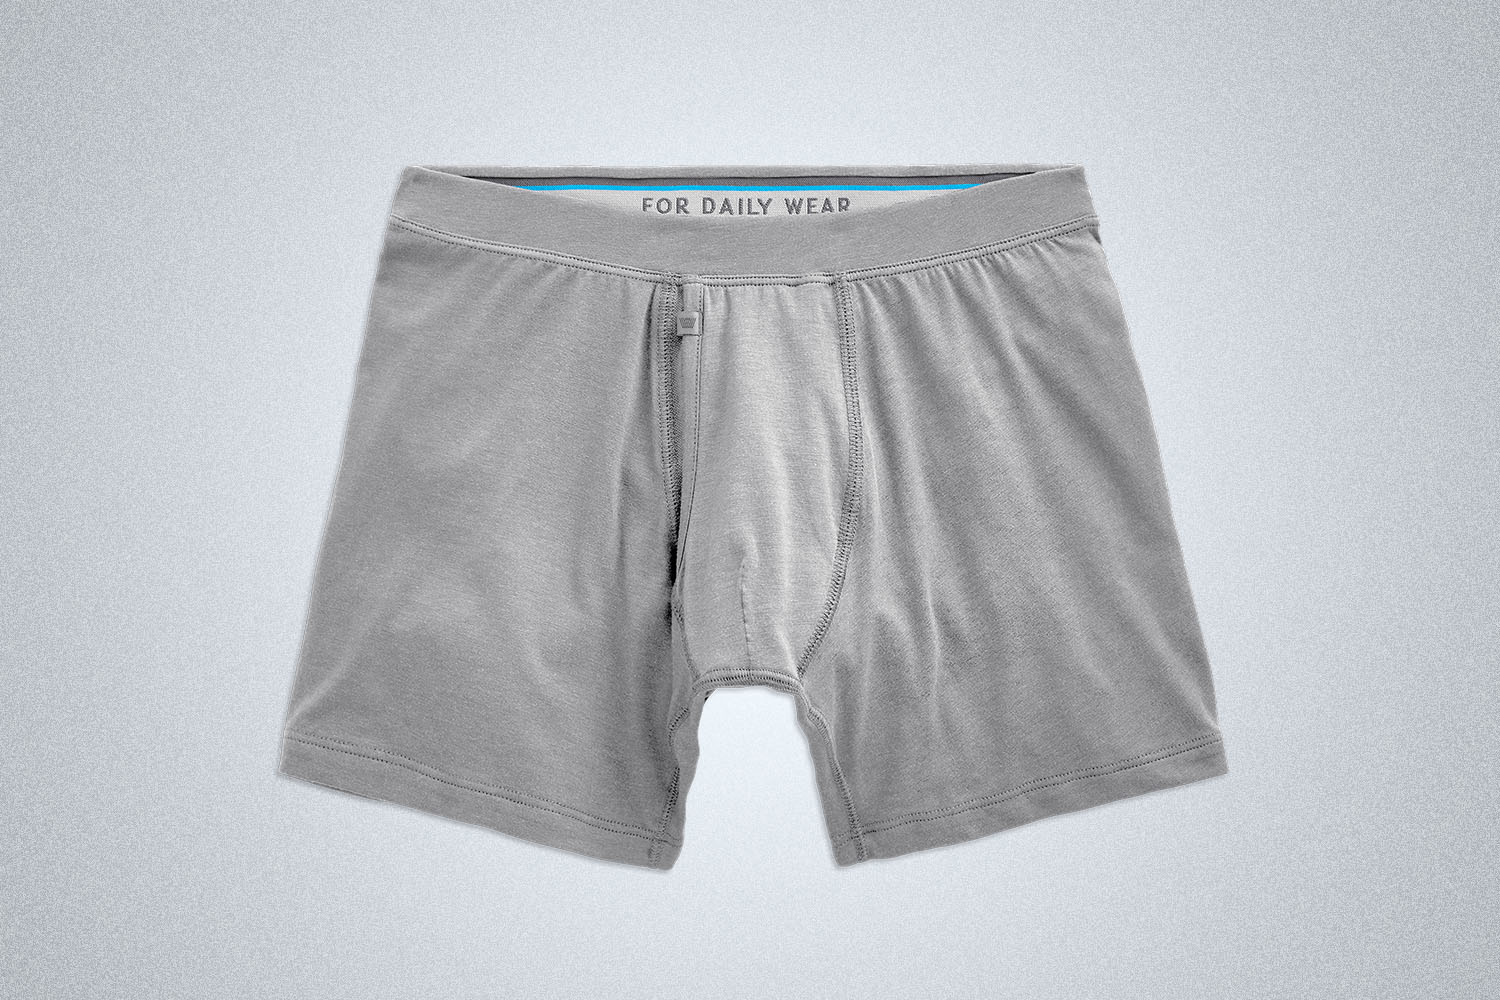 a pair of grey trunks on a grey background